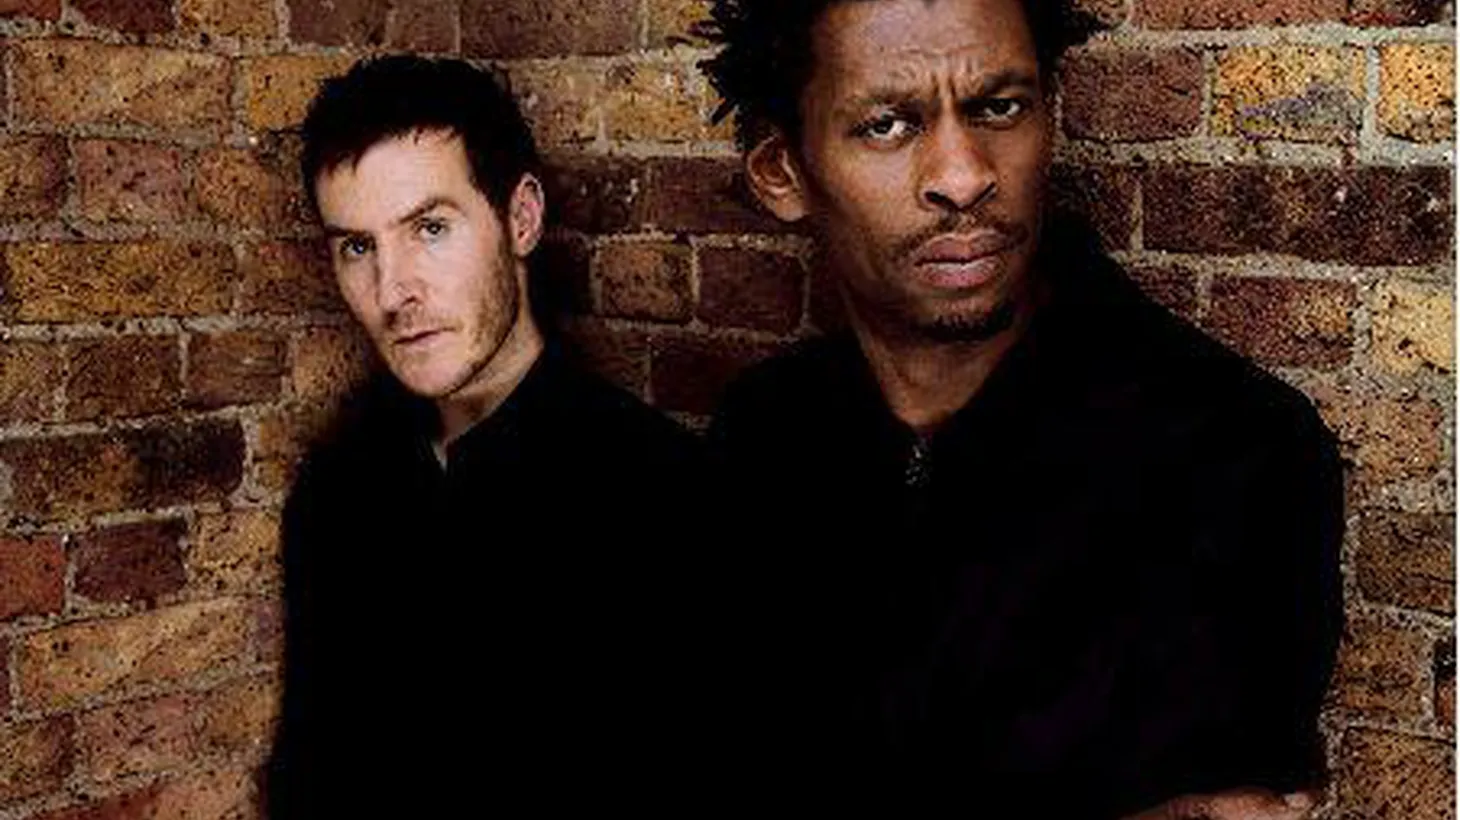 Massive Attack offer a rare and exclusive live session with an appearance from reggae superstar Horace Andy on Morning Becomes Eclectic at 11:15am.